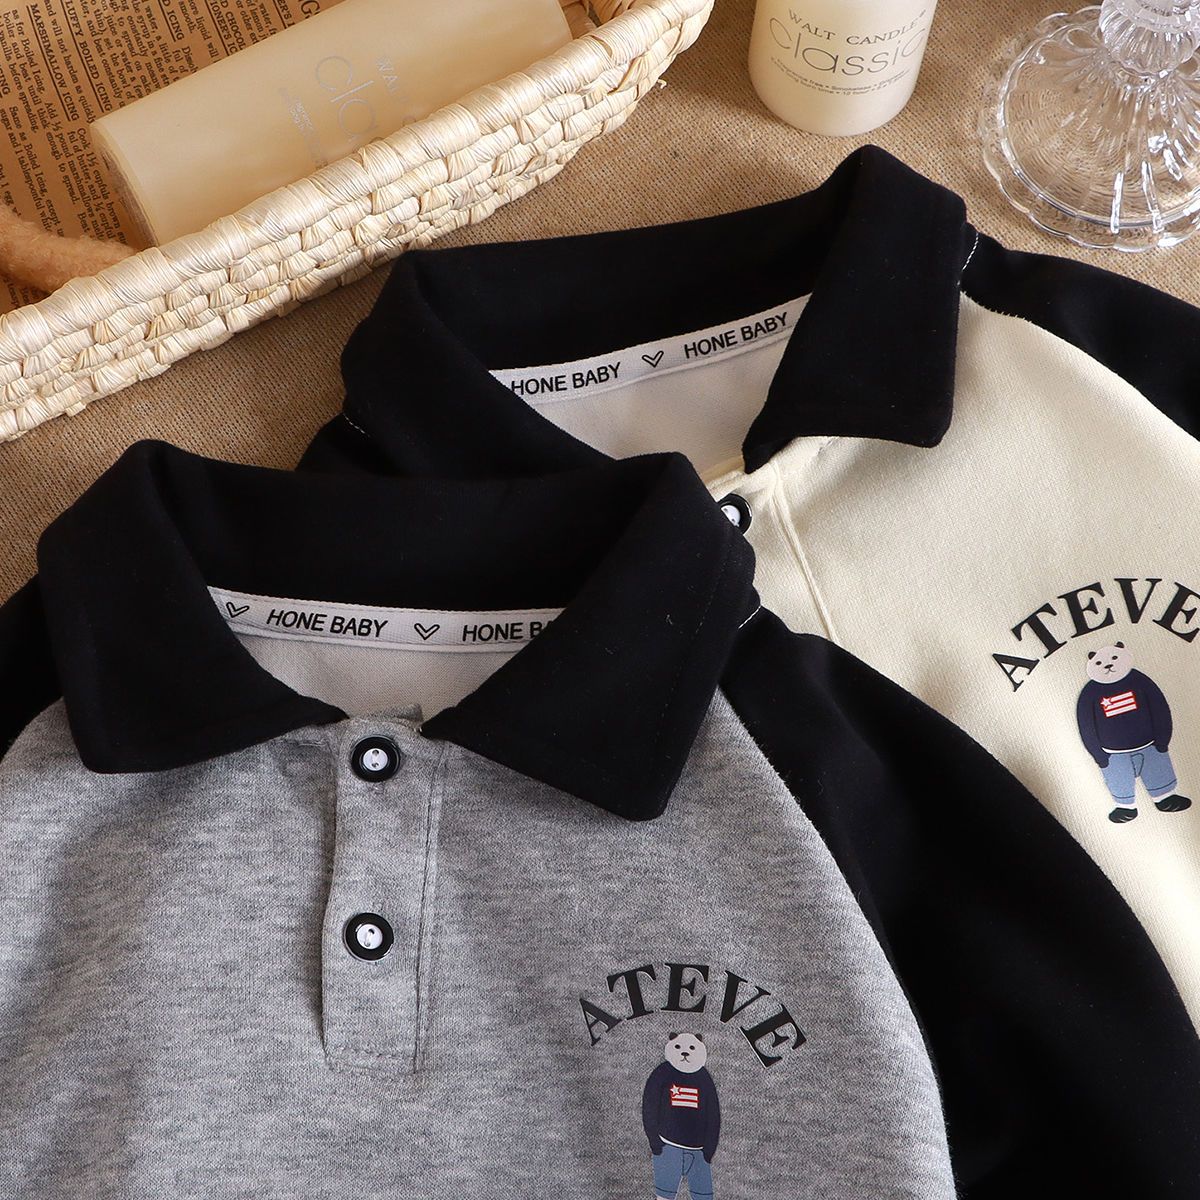 Spring and Autumn style long-sleeved sweatshirt POLO shirt, handsome, simple and spliced, trendy children's style tops, sweatshirts, children's men's